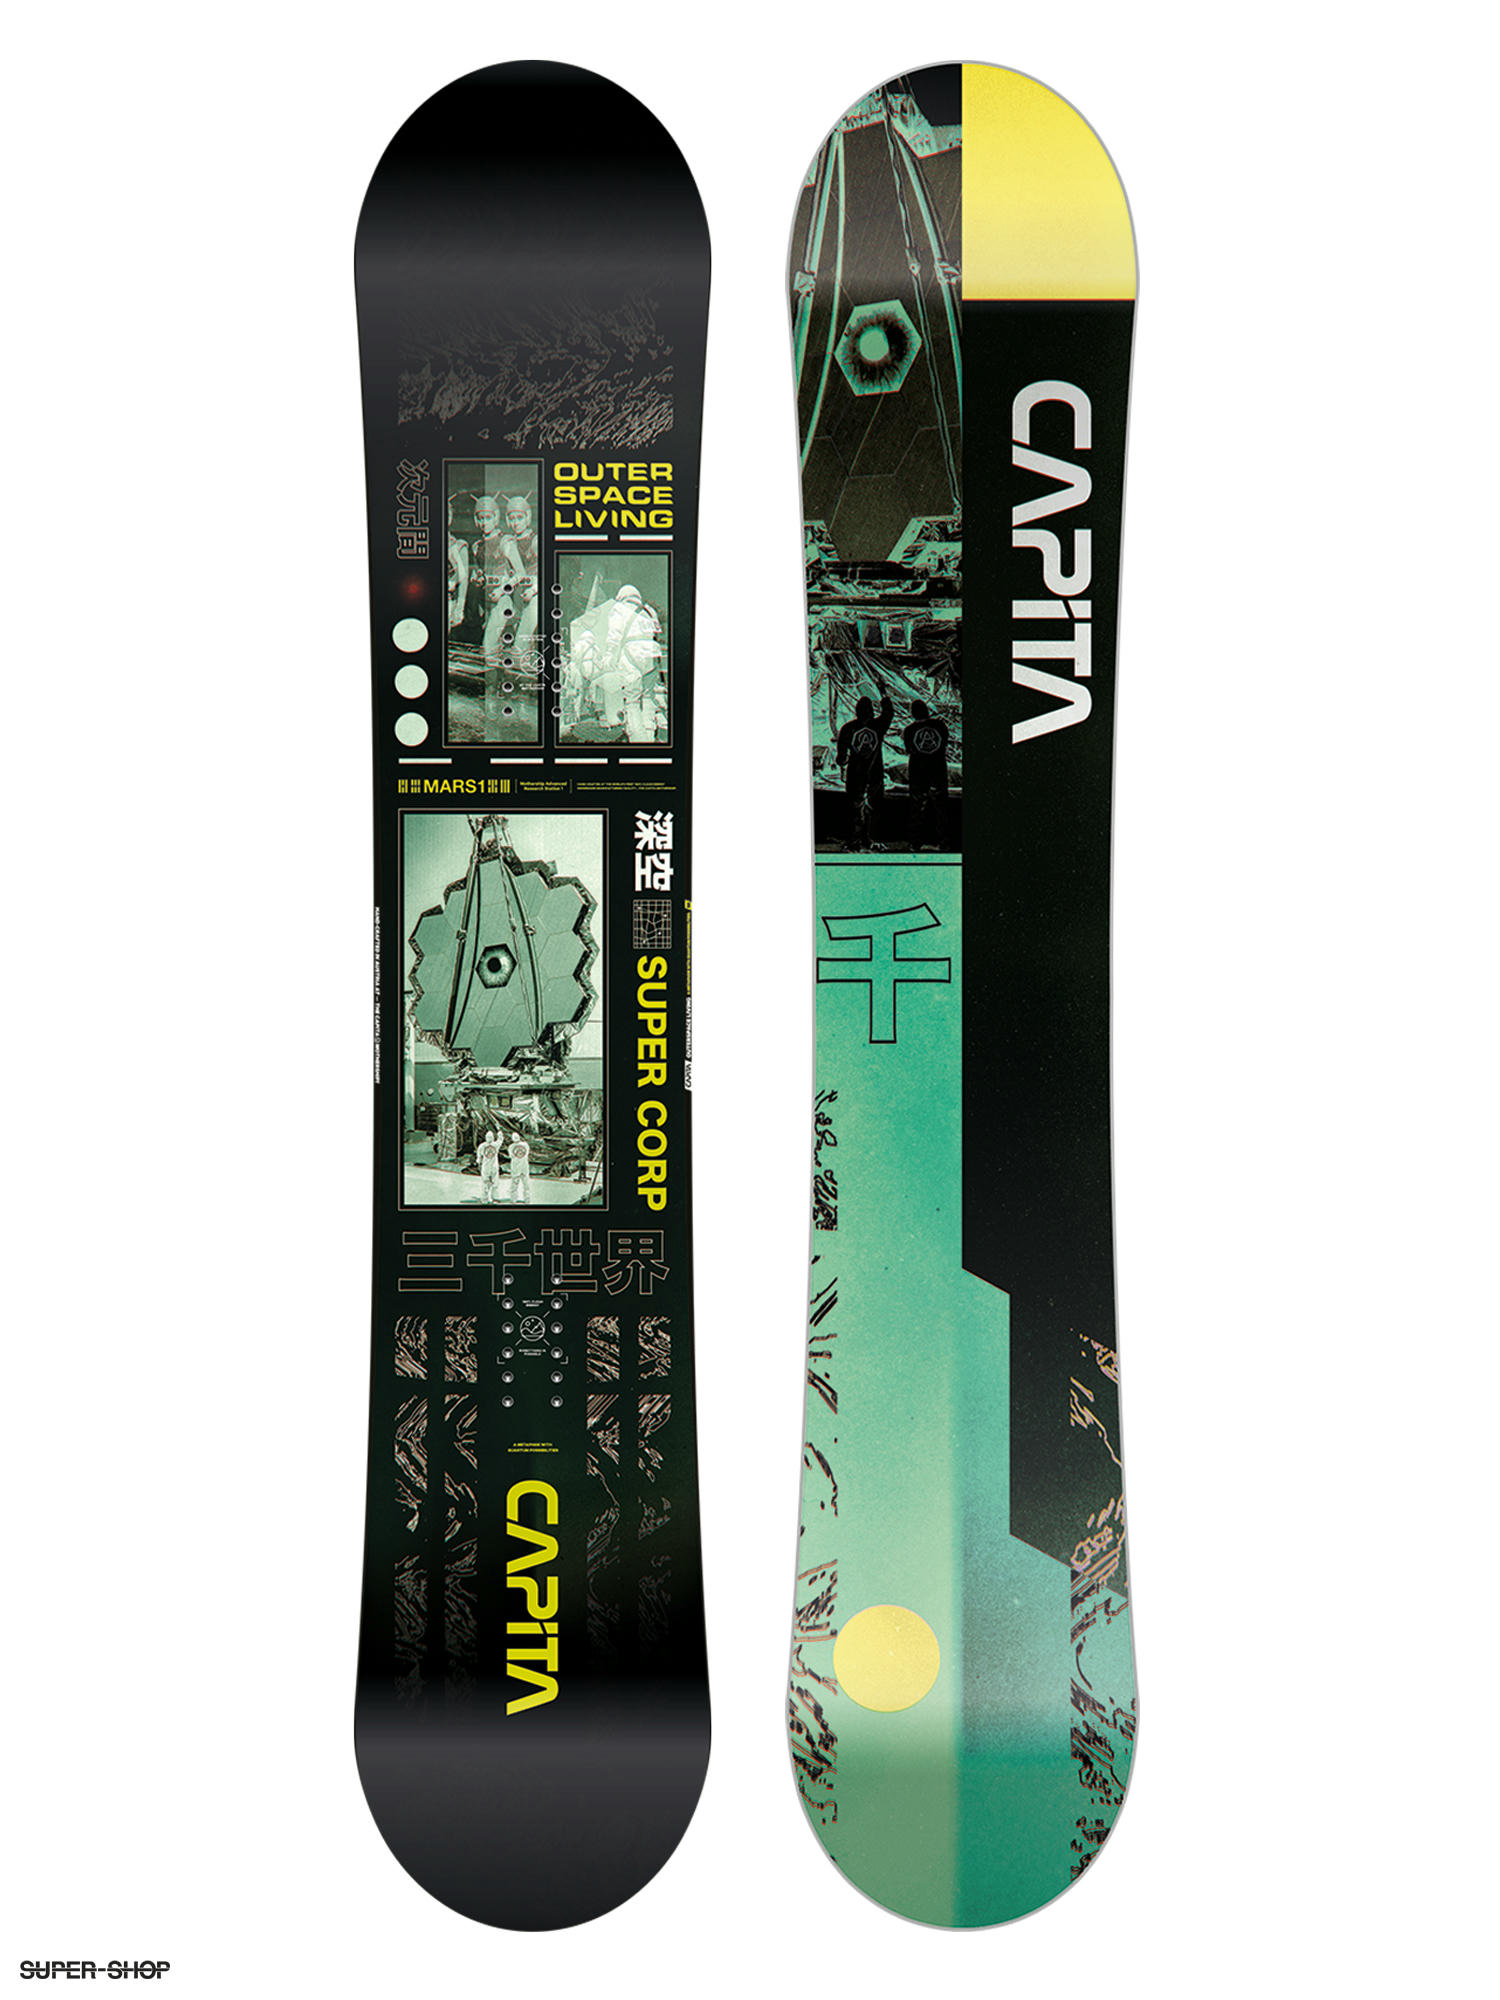 Mens Capita Outerspace Living Snowboard